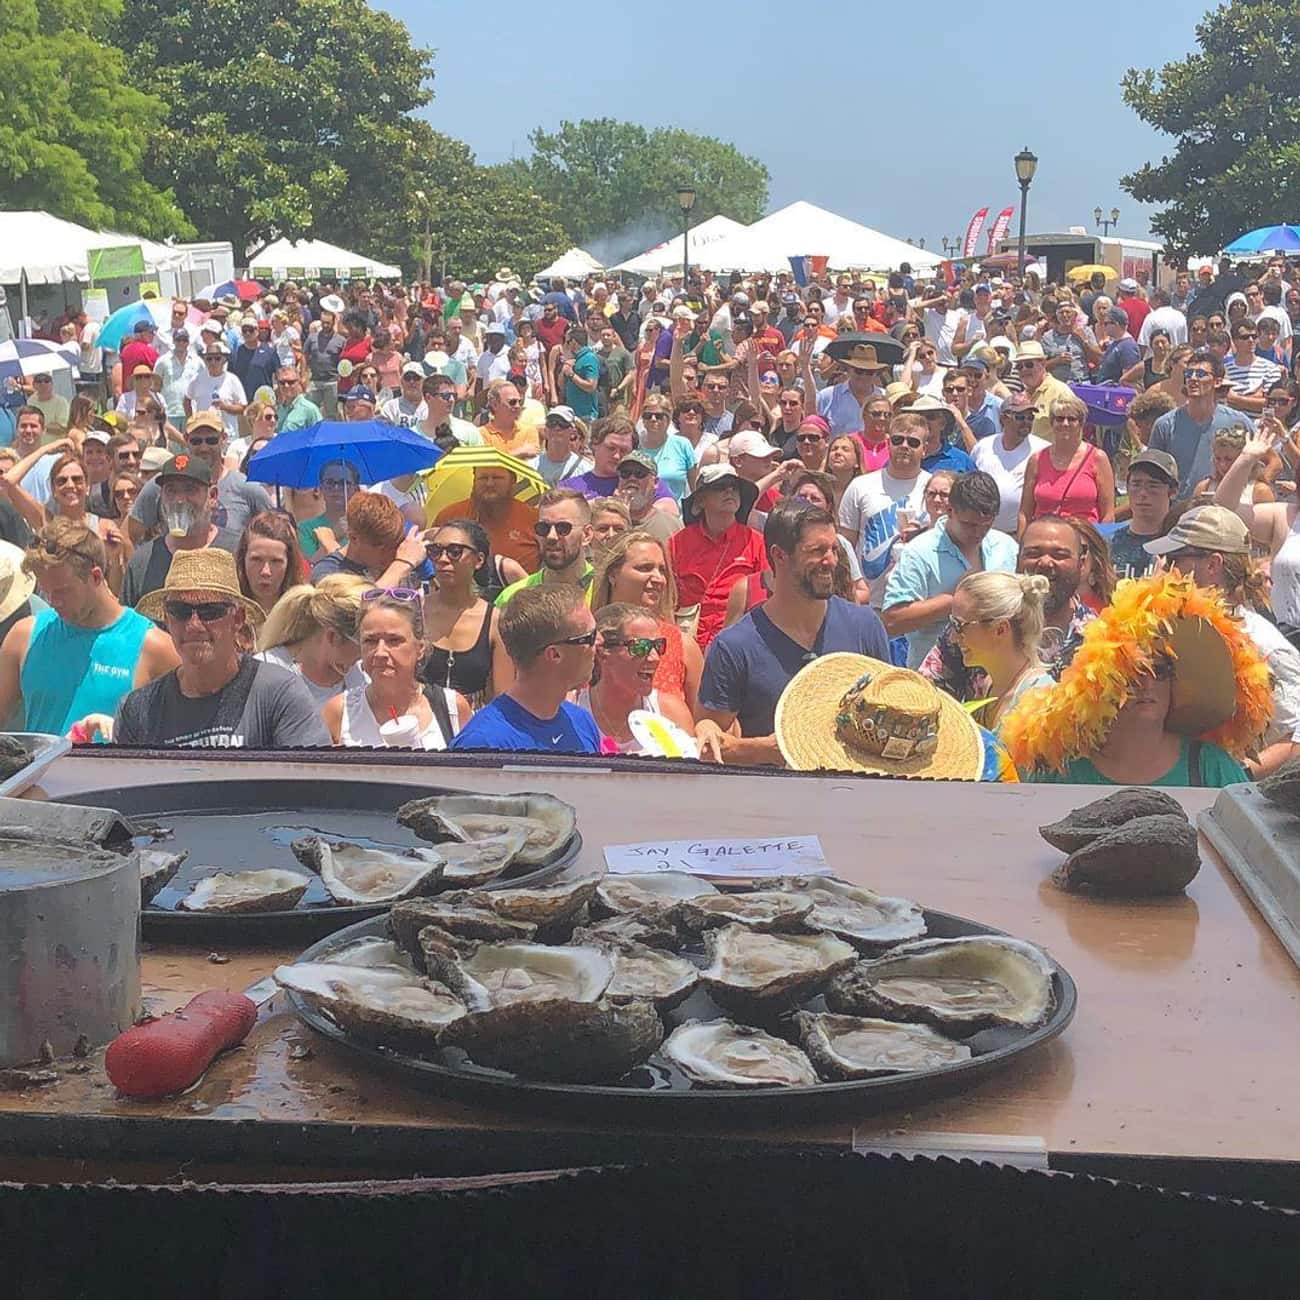 The Acme Oyster Eating World Championship